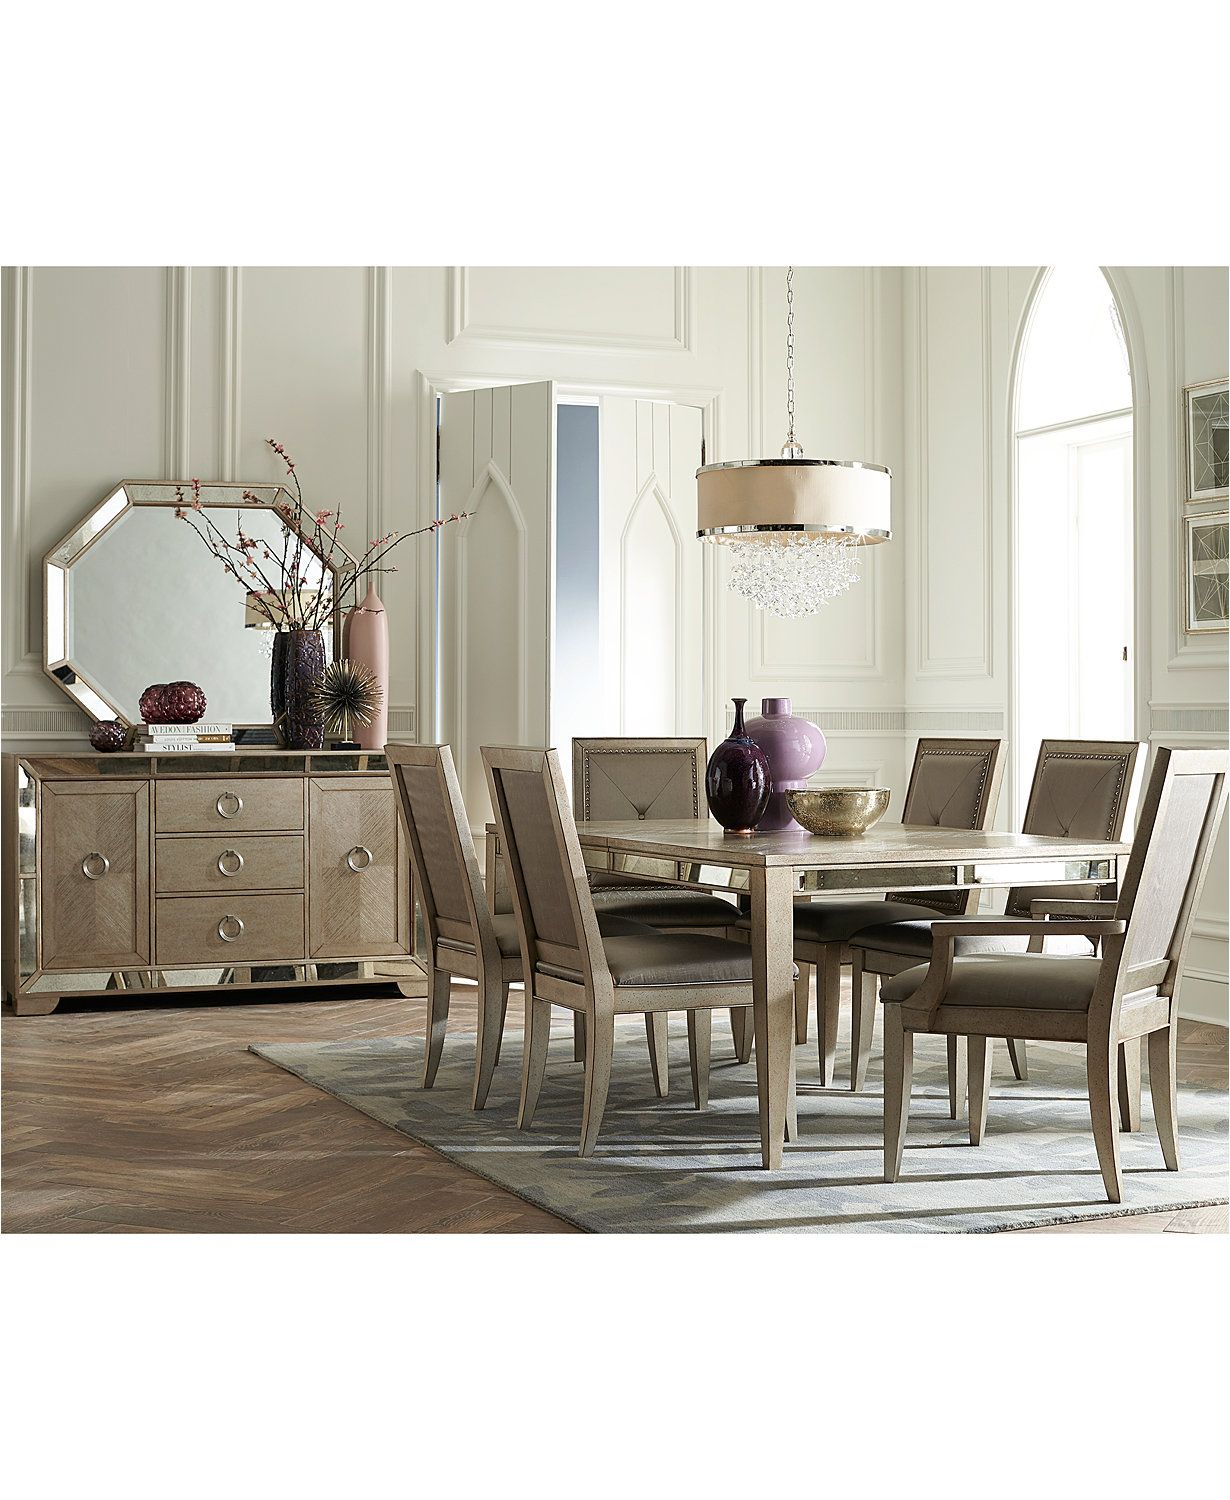 Ailey Dining Room Furniture Collection Only At Macys throughout dimensions 1230 X 1500